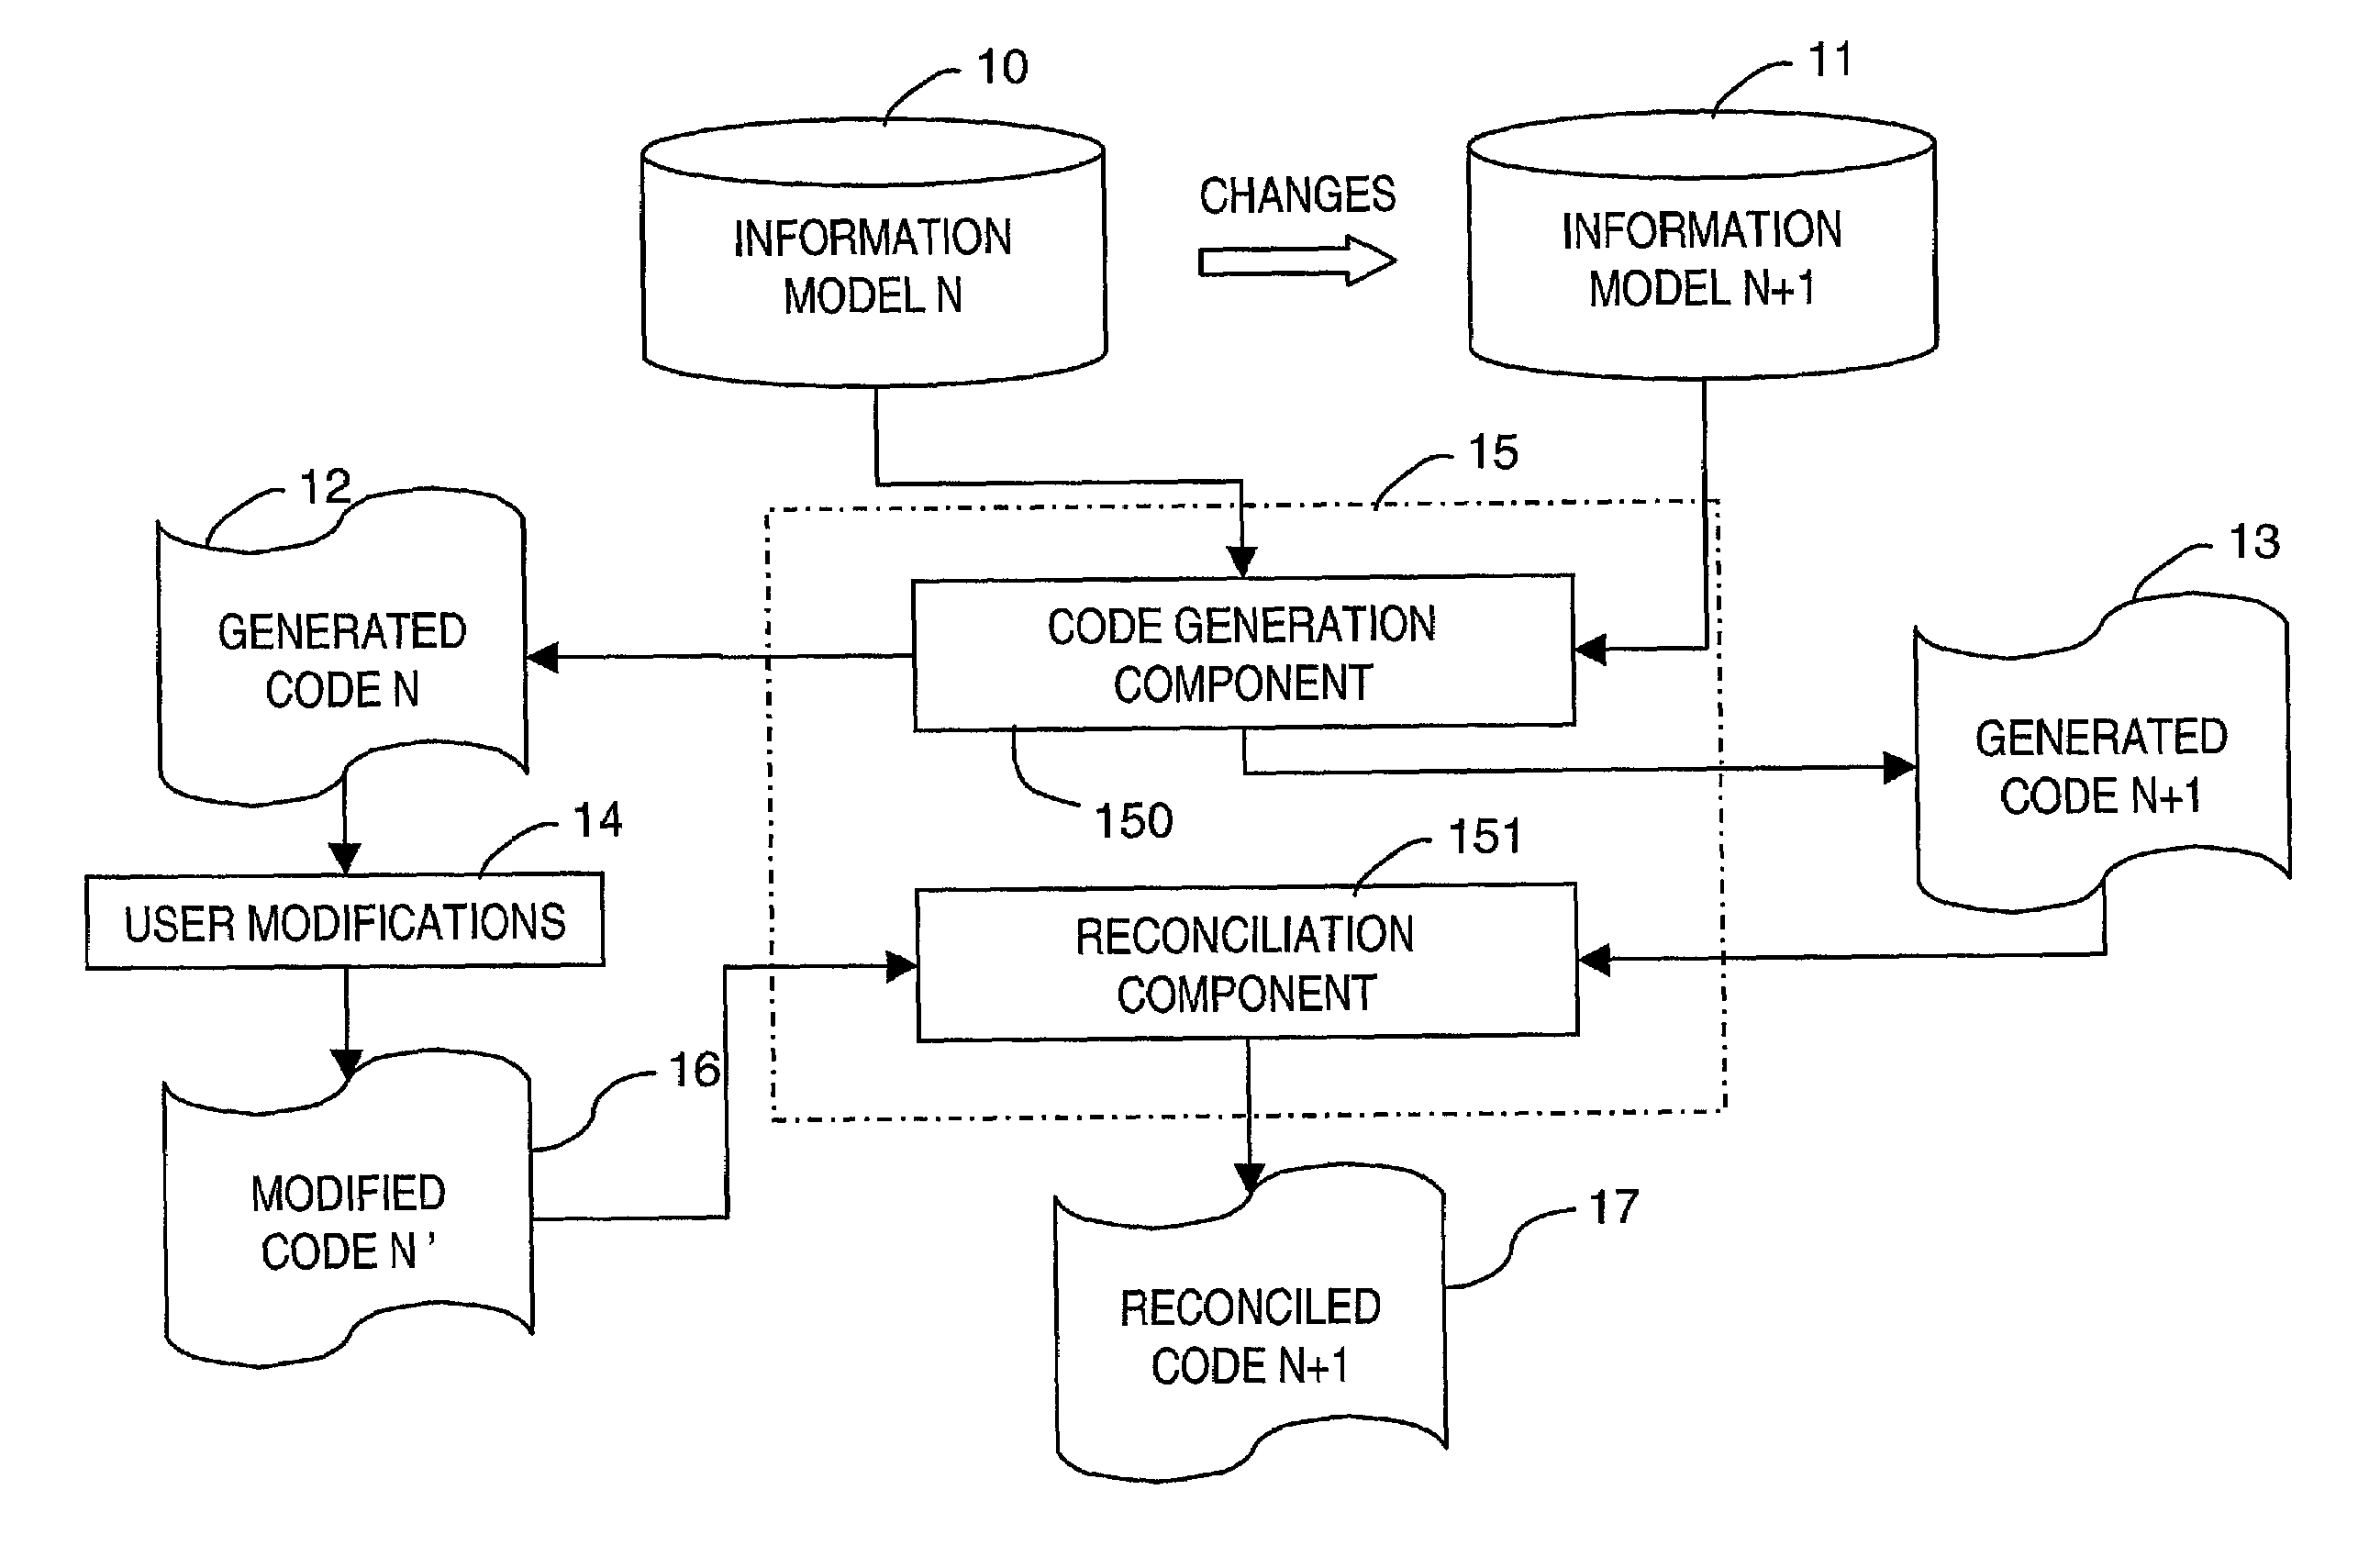 Method and system for generating program source code of a computer application from an information model